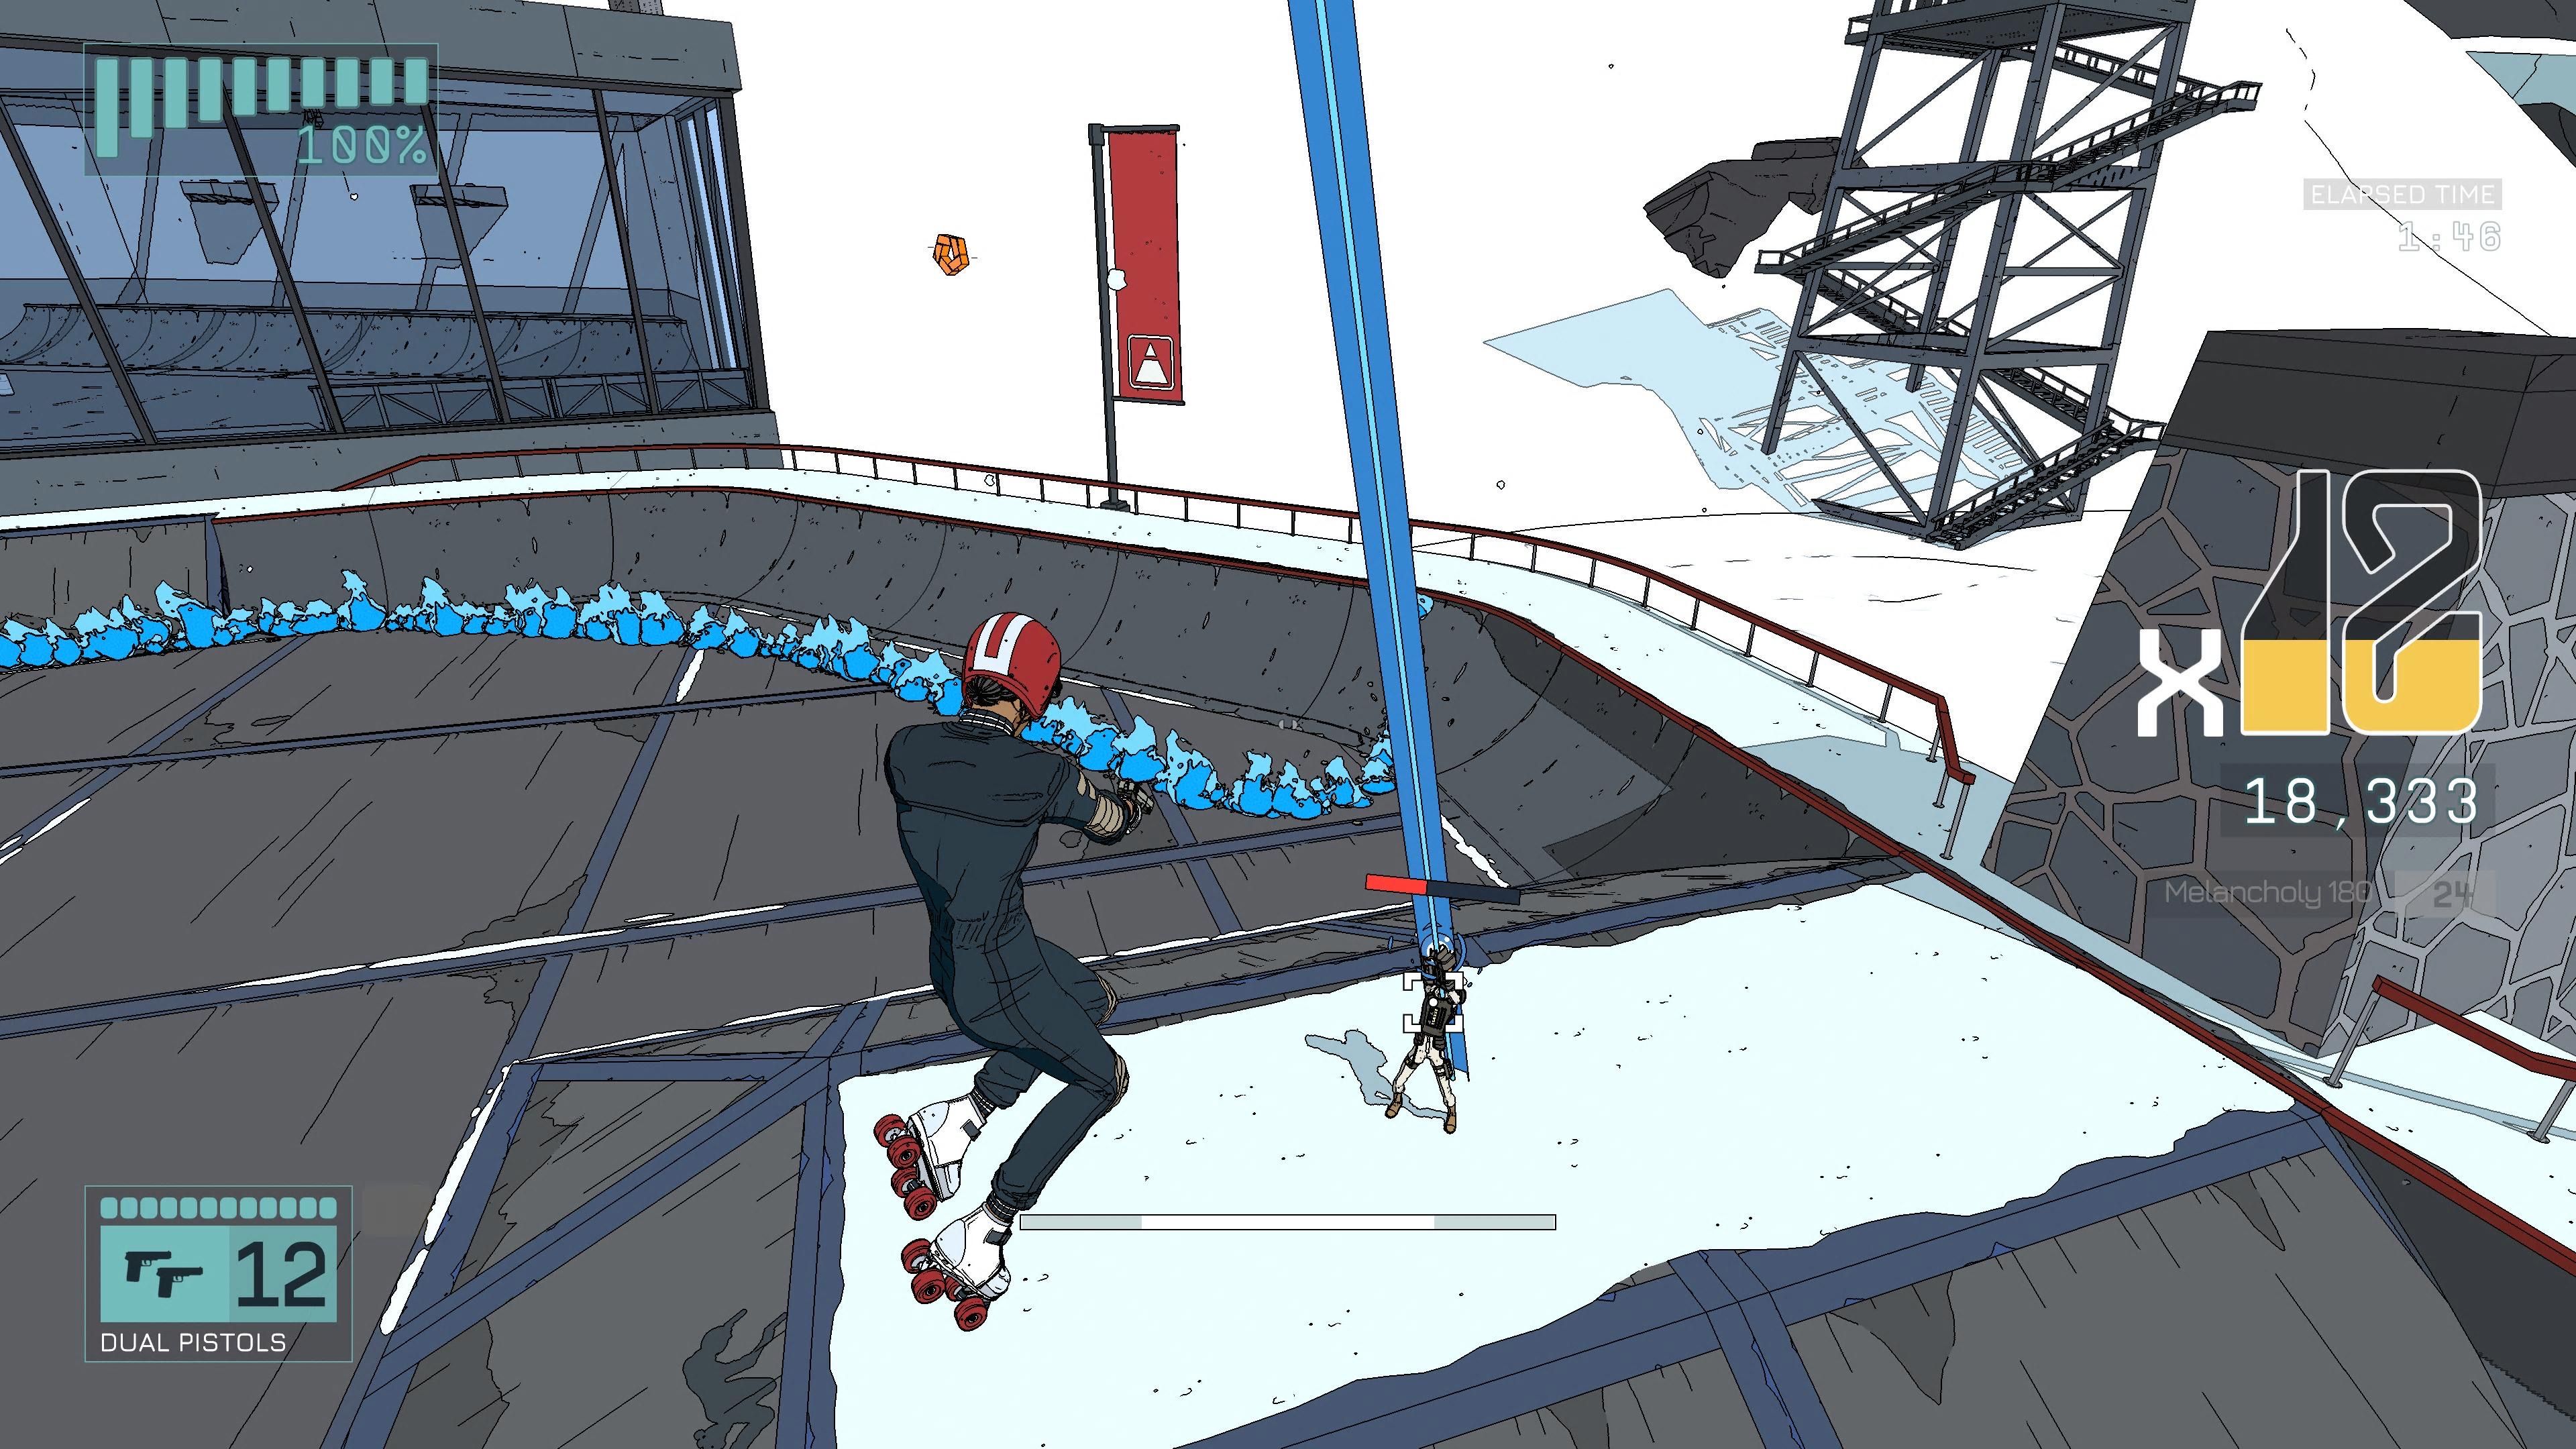 Rollerdrome Review: A Gladiatorial Deathmatch On Wheels